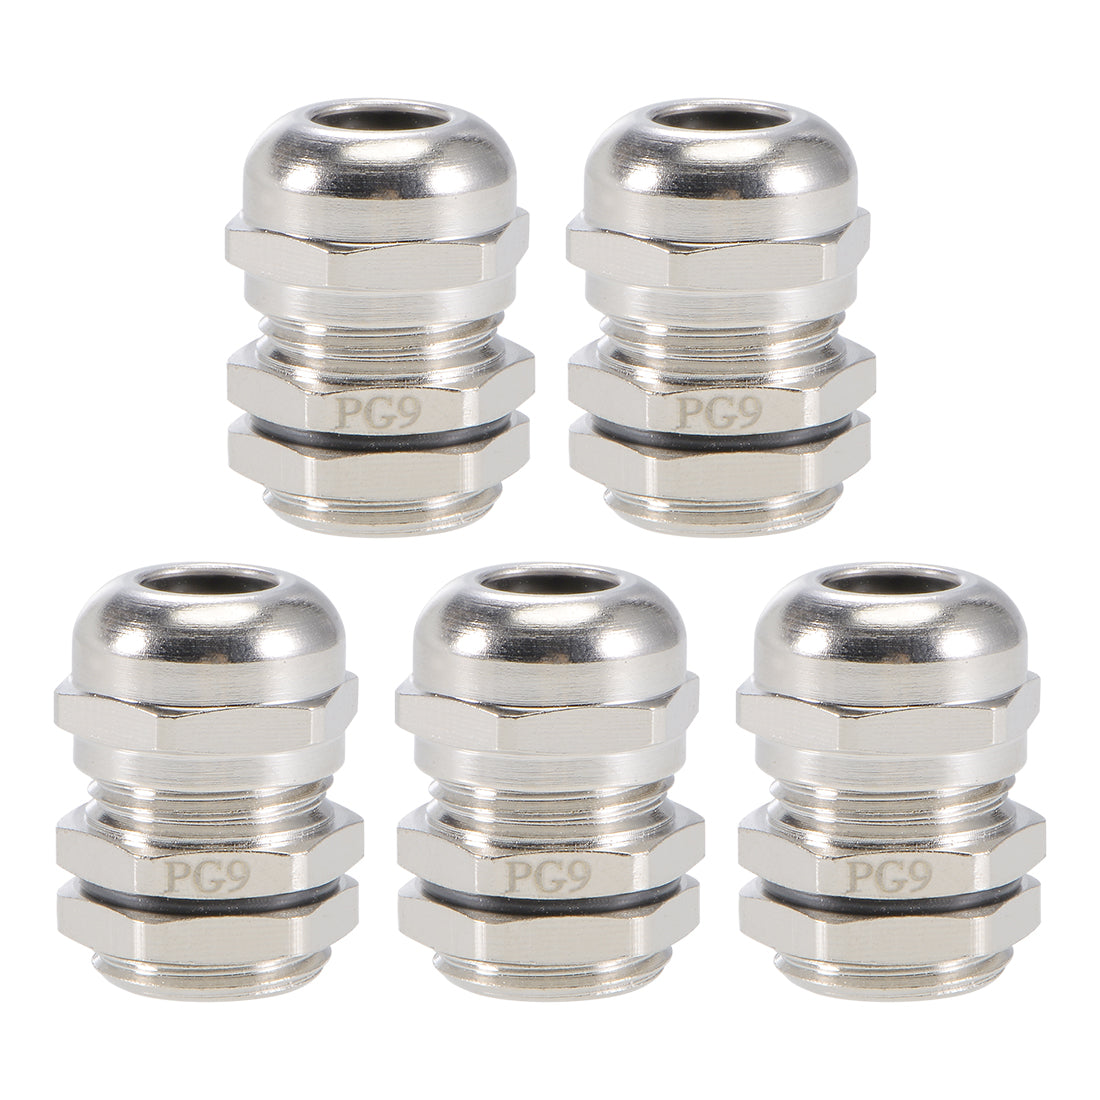 uxcell Uxcell PG9 Cable Gland 4mm-8mm Wire Hole Waterproof Metal Joint Adjustable Locknut with Washer 5pcs